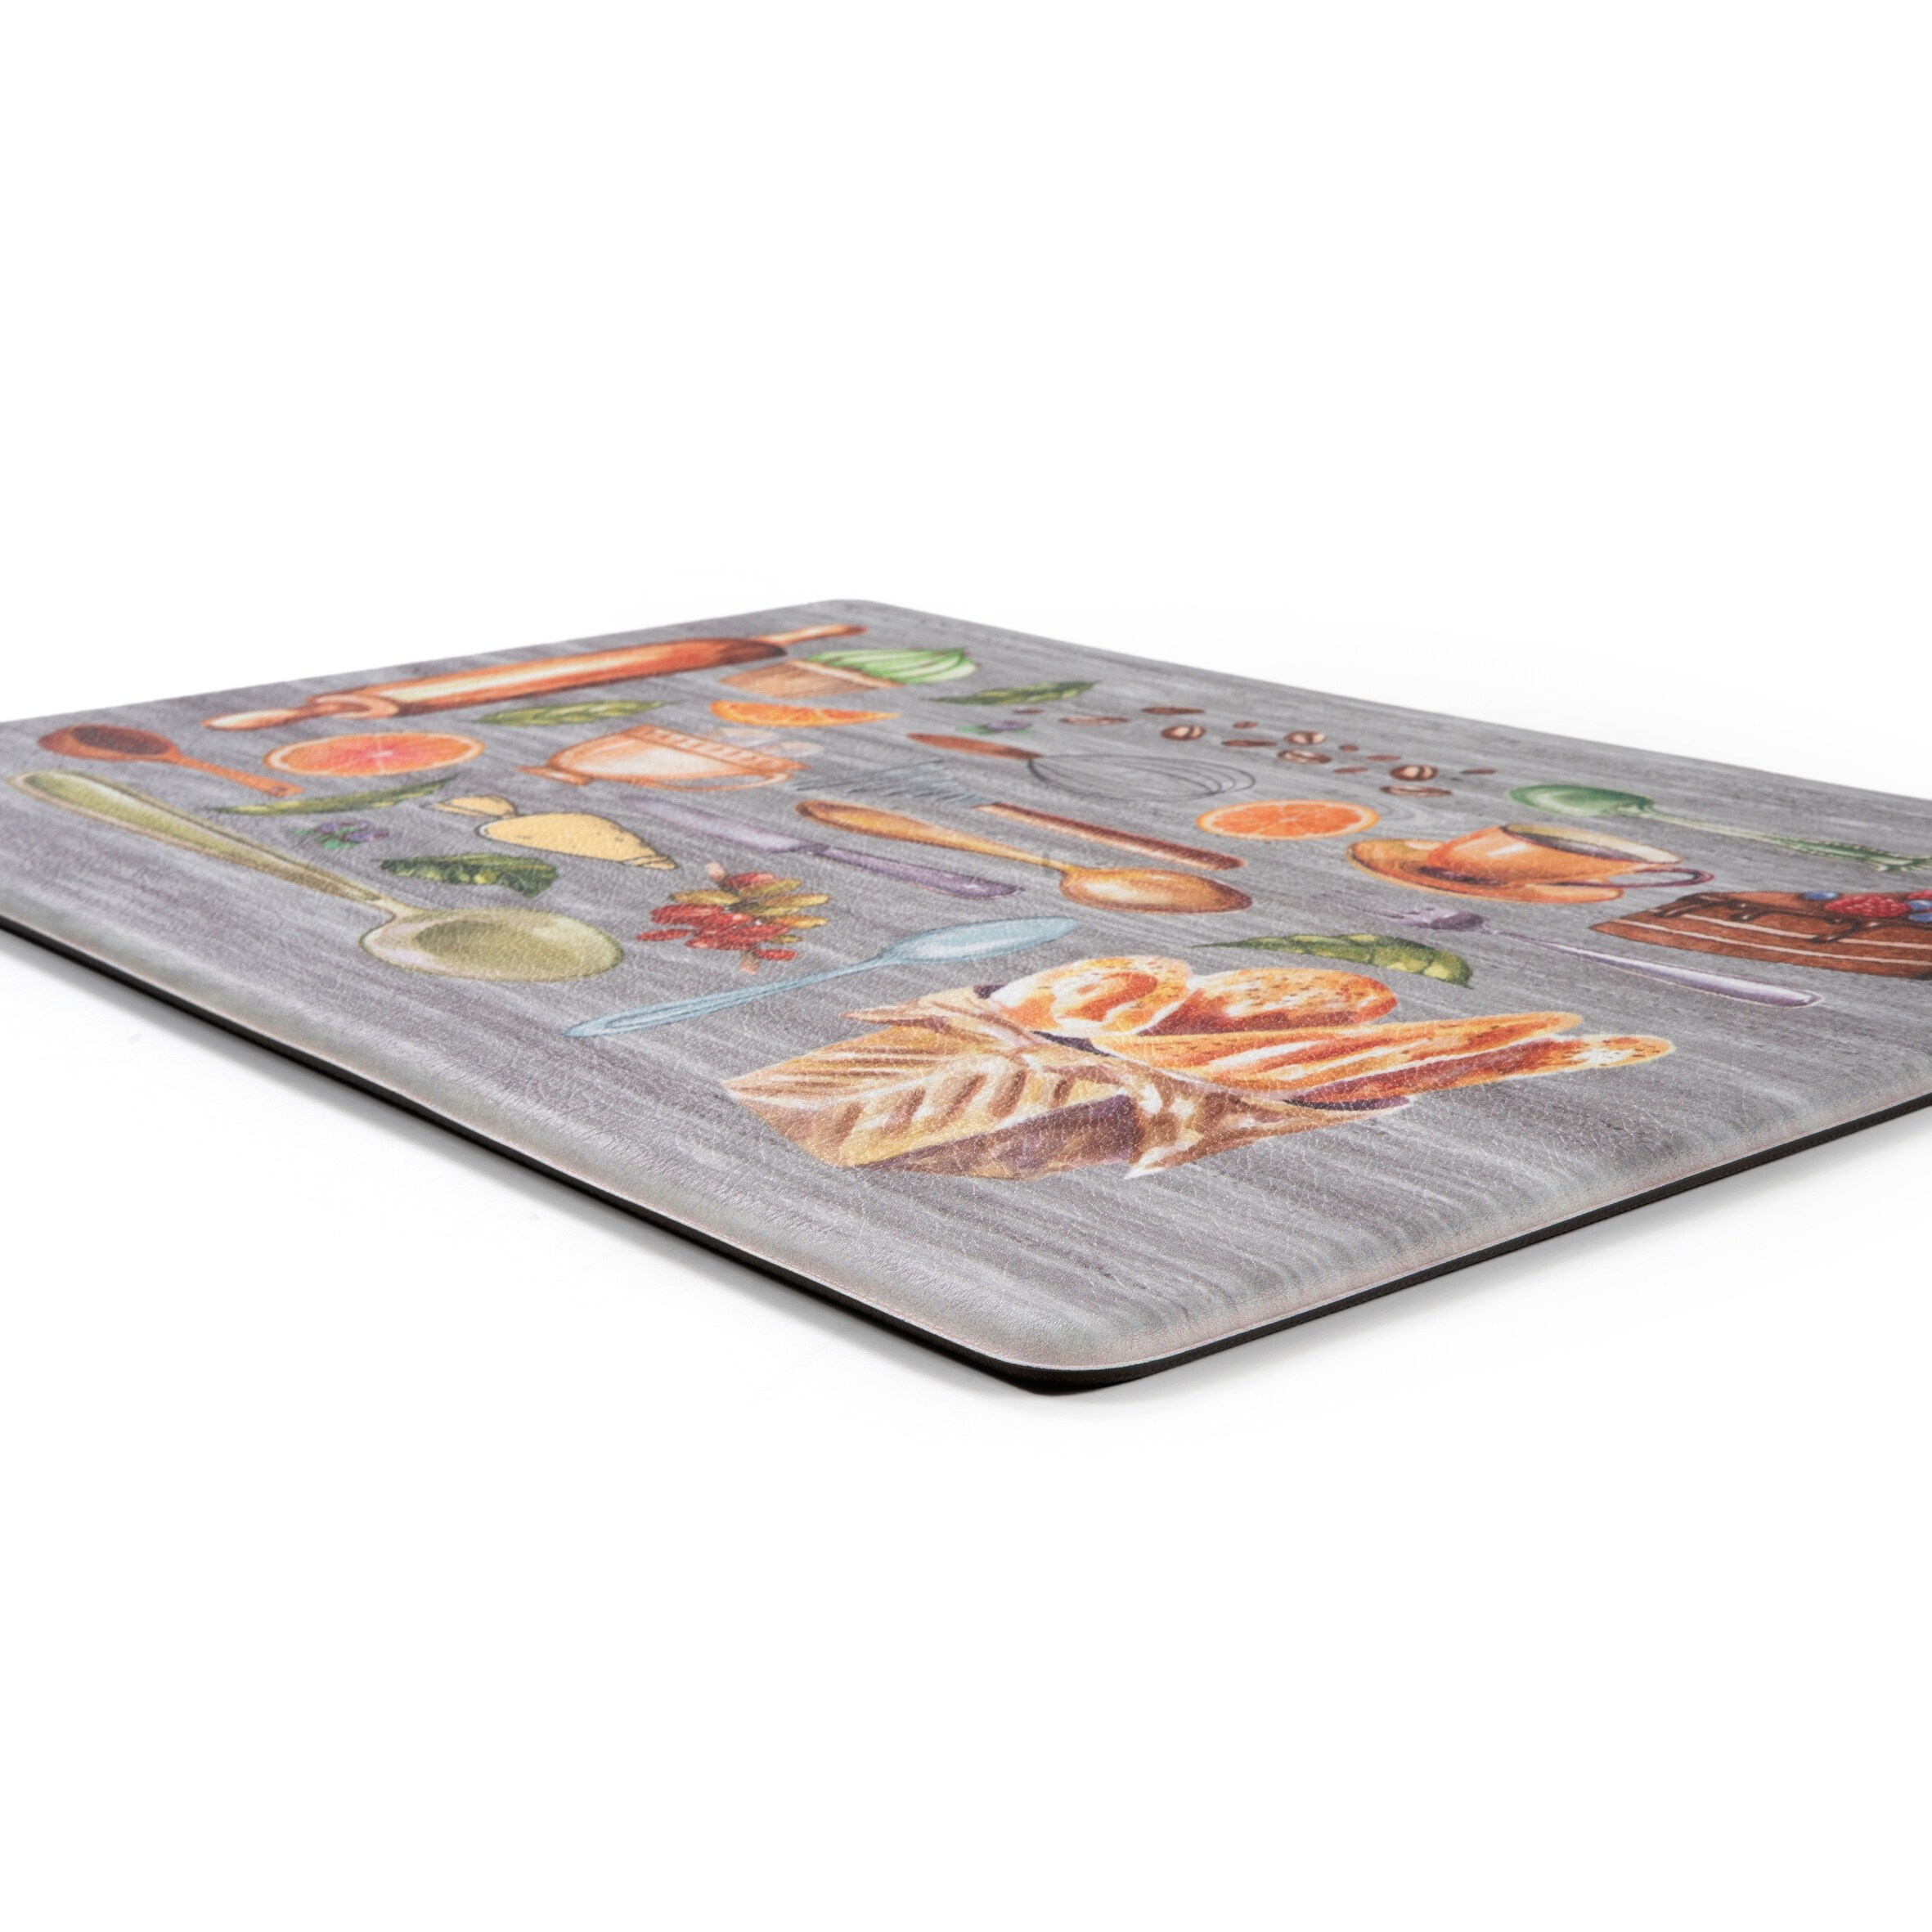 https://ak1.ostkcdn.com/images/products/is/images/direct/acb82d6b63e9c730413149483c96e16d0d7db2e0/Kitchen-Anti-Fatigue-Standing-Mat.jpg